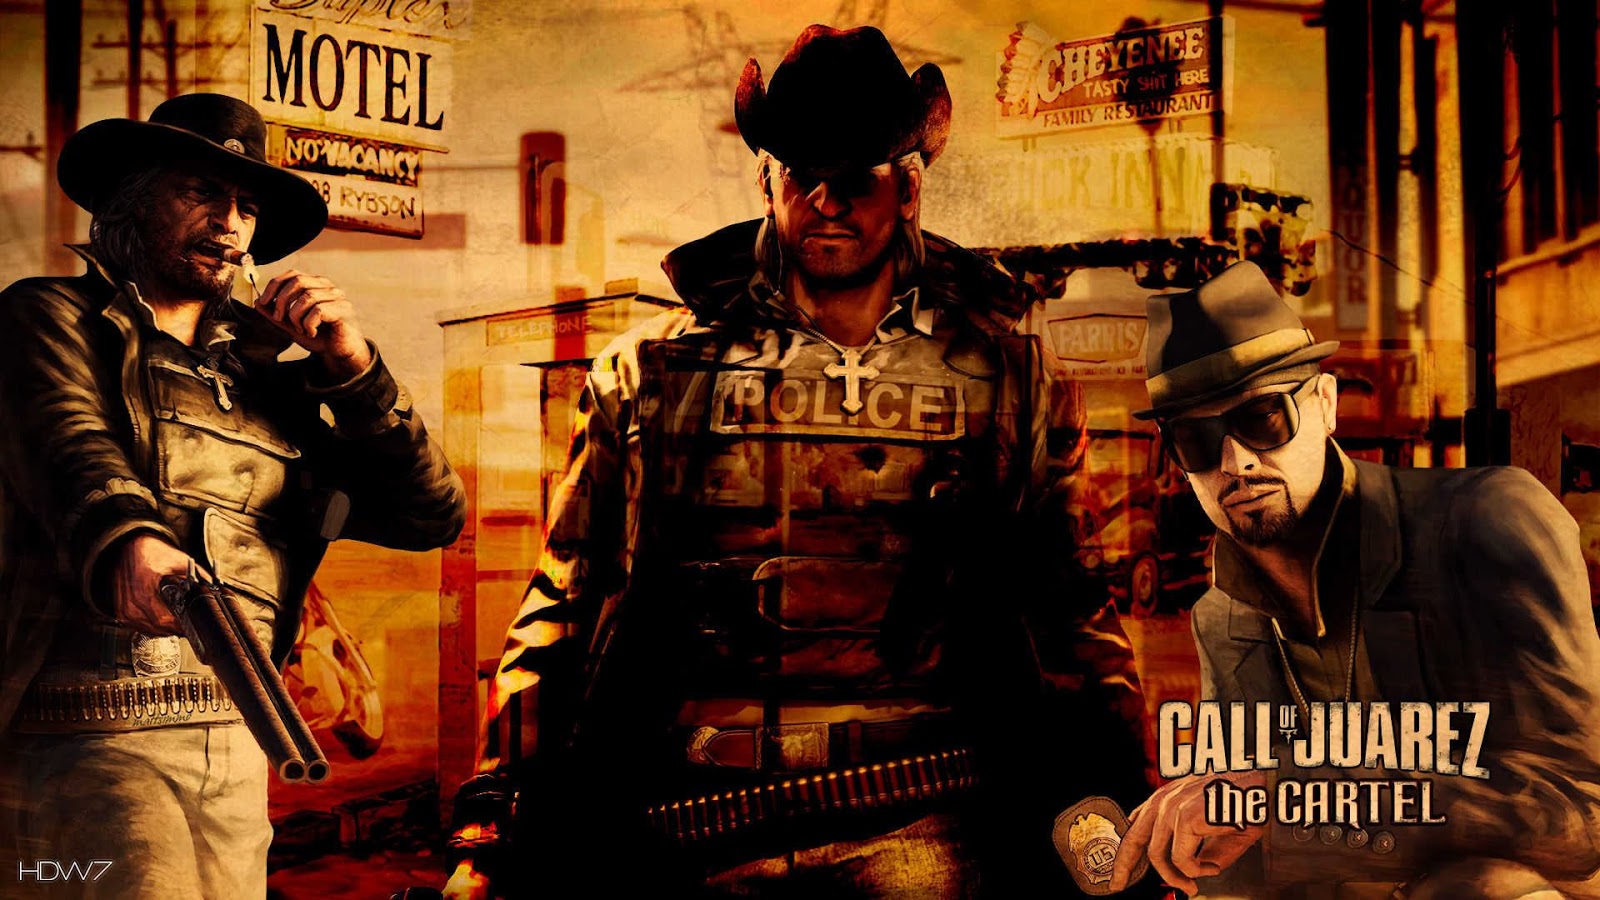 call of juarez the cartel update 1 skidrow crack games for pc